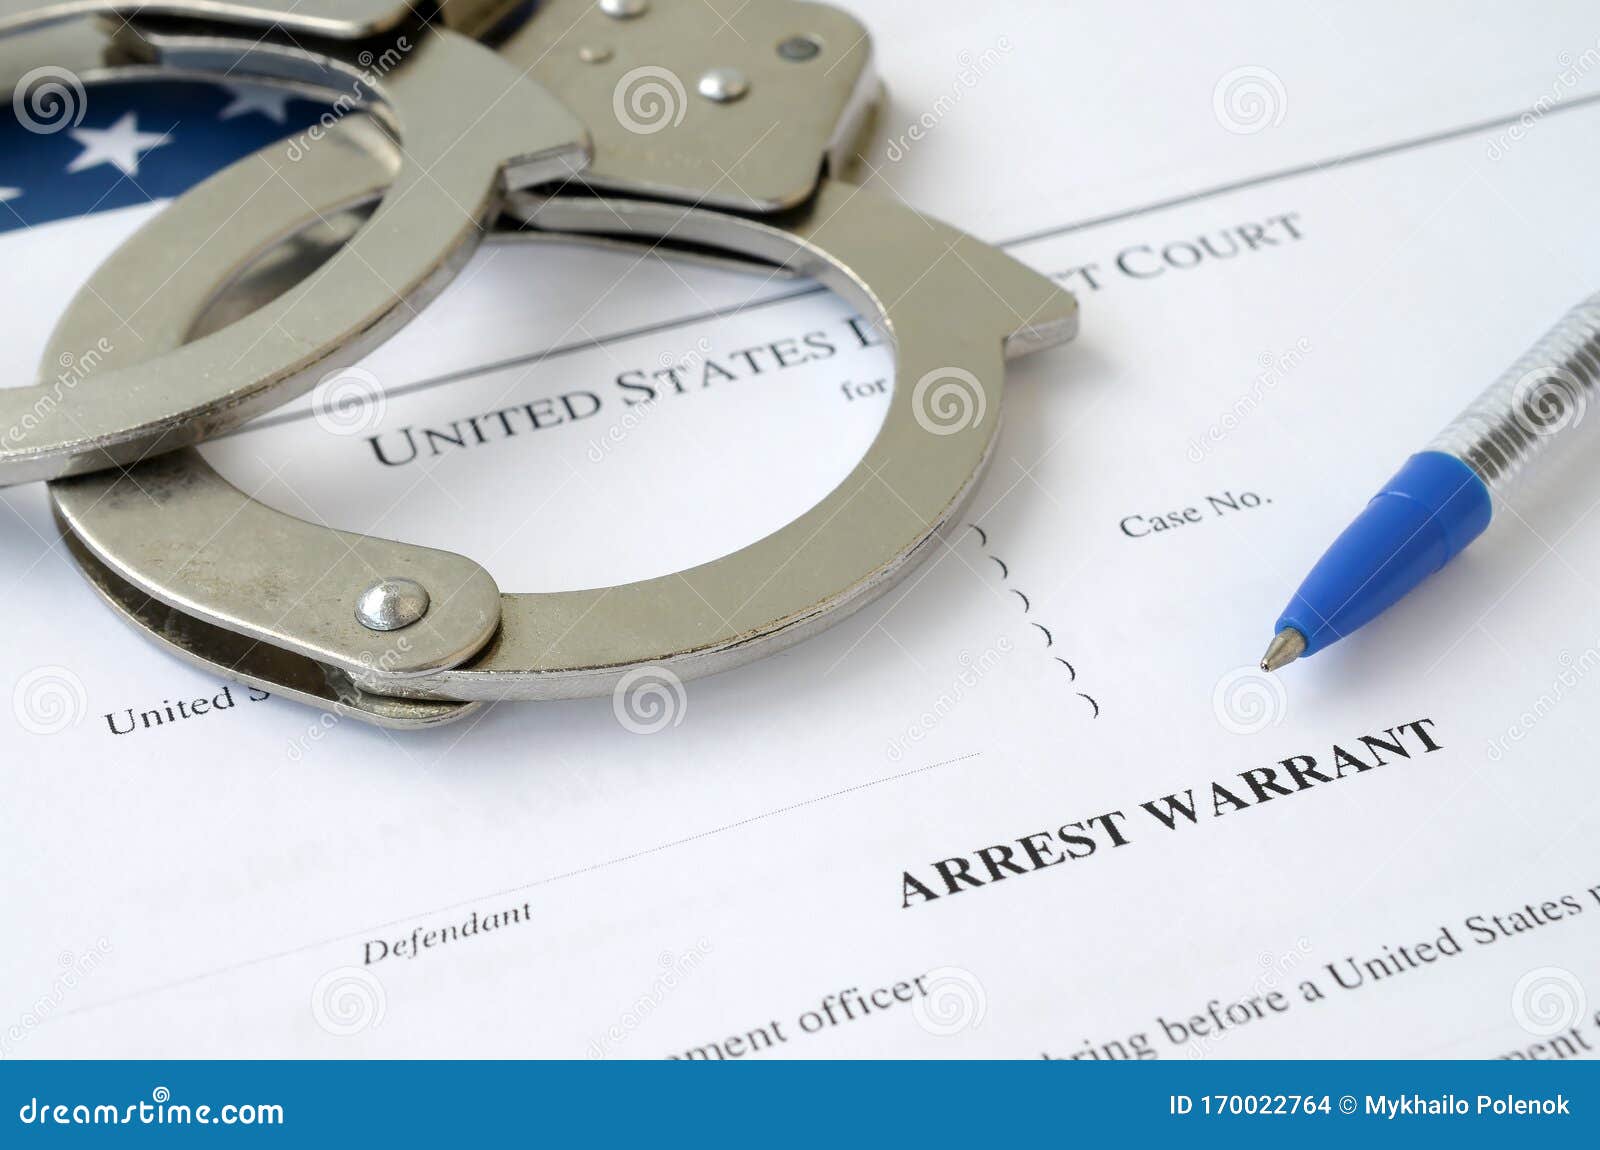 district court arrest warrant court papers with handcuffs and blue pen on united states flag. concept of permission to arrest